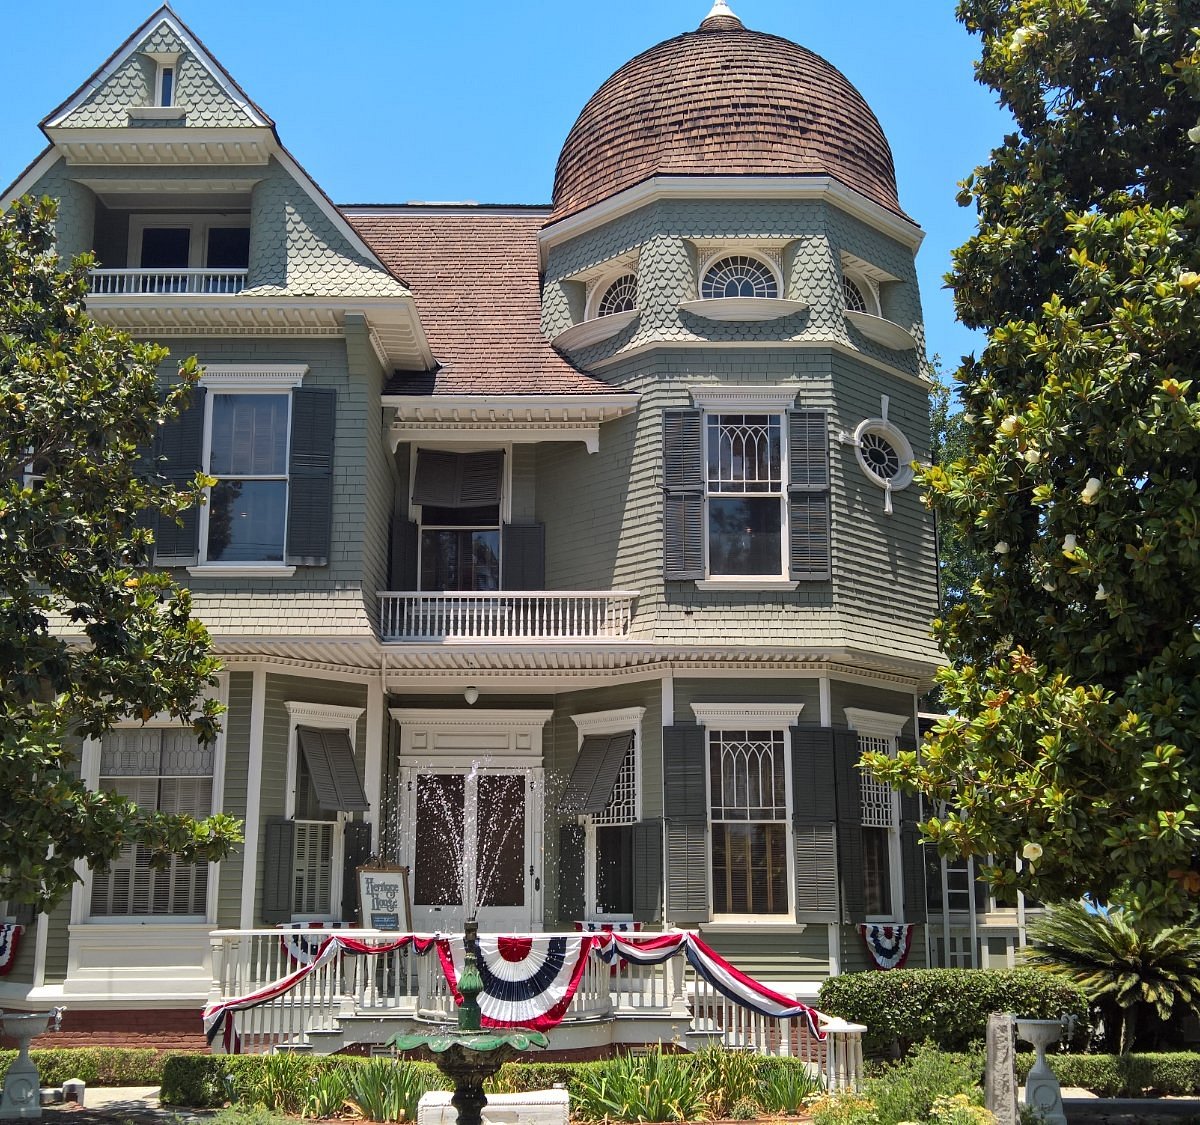 heritage house tours